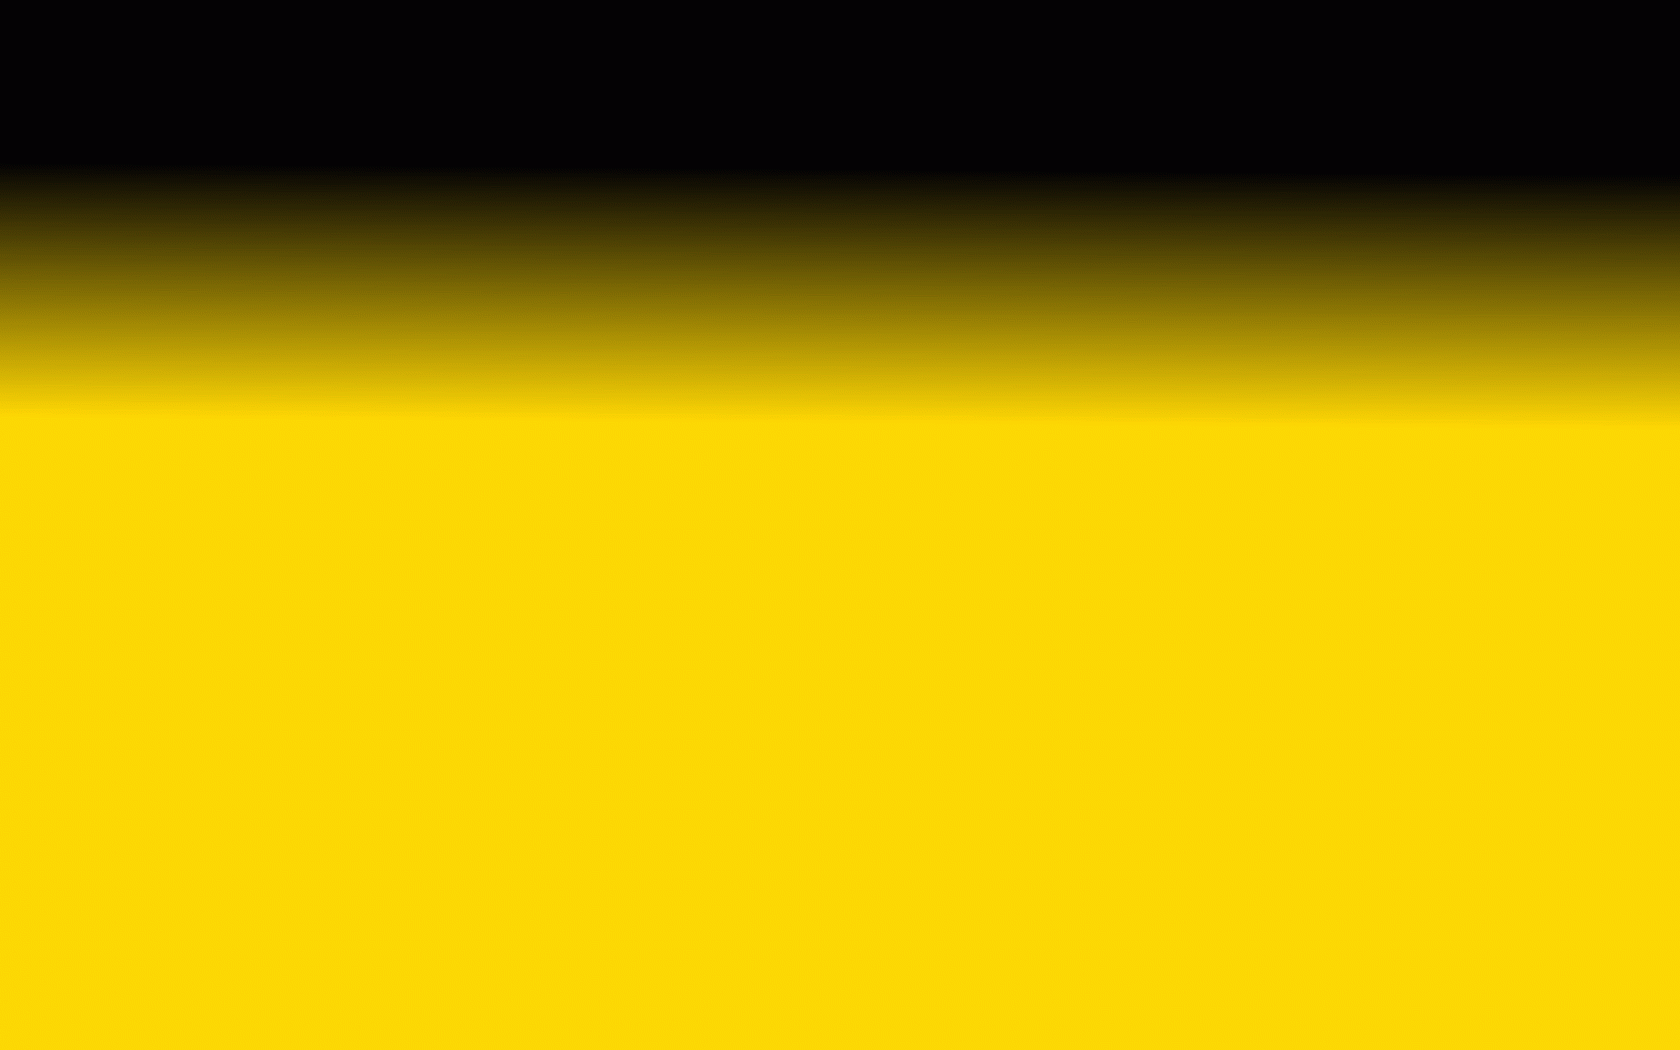 Free download Nothing found for Black yellow gradient desktop wallpapers 19...